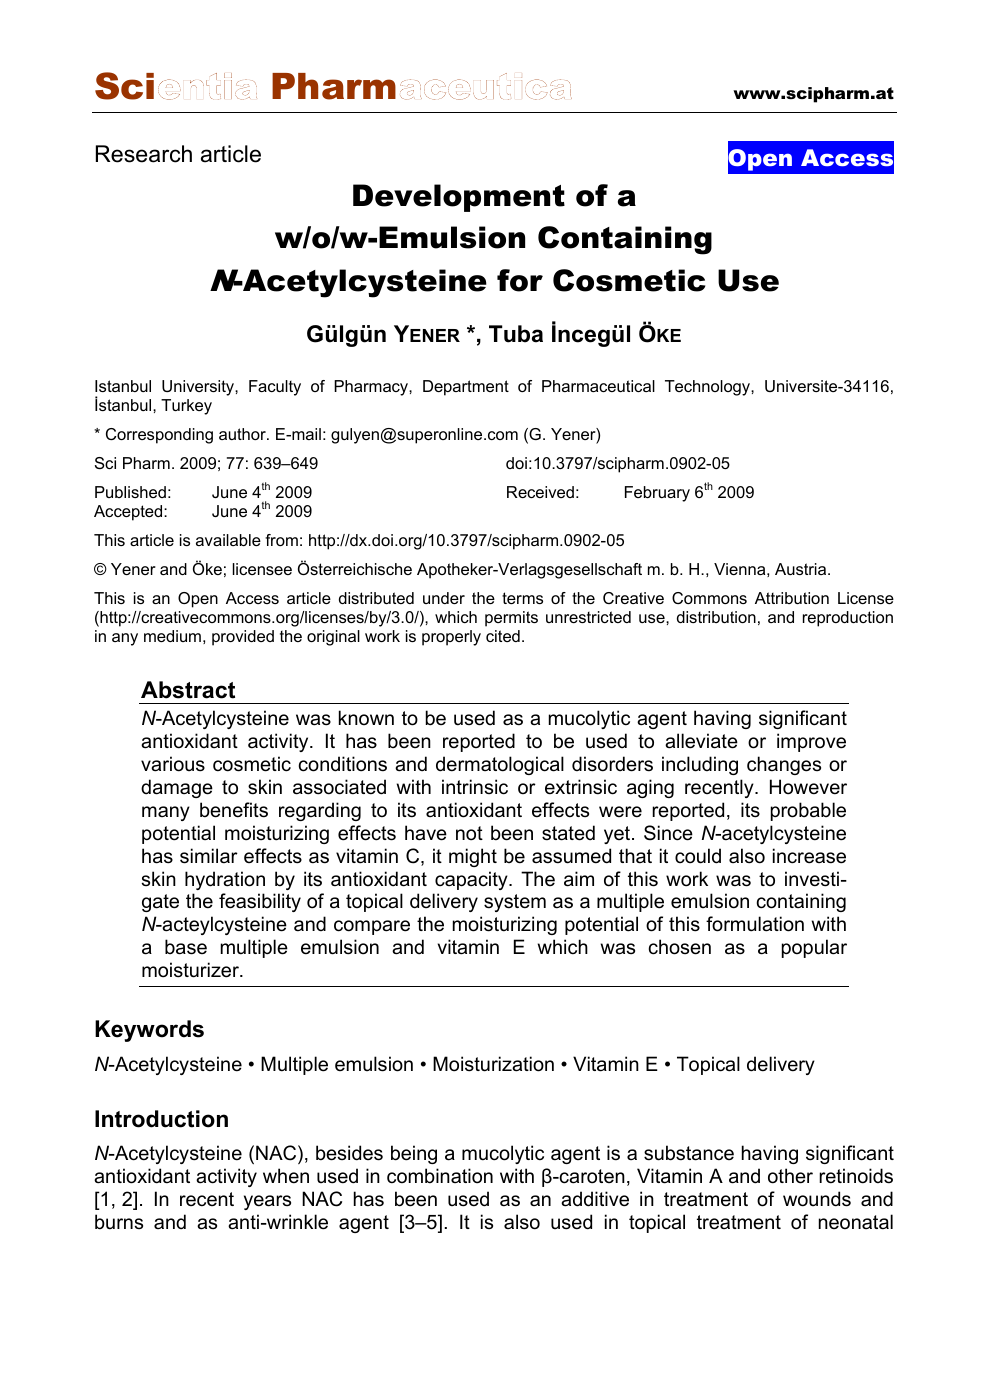 Development of a w/o/w Emulsion Containing N Acetylcysteine for ...